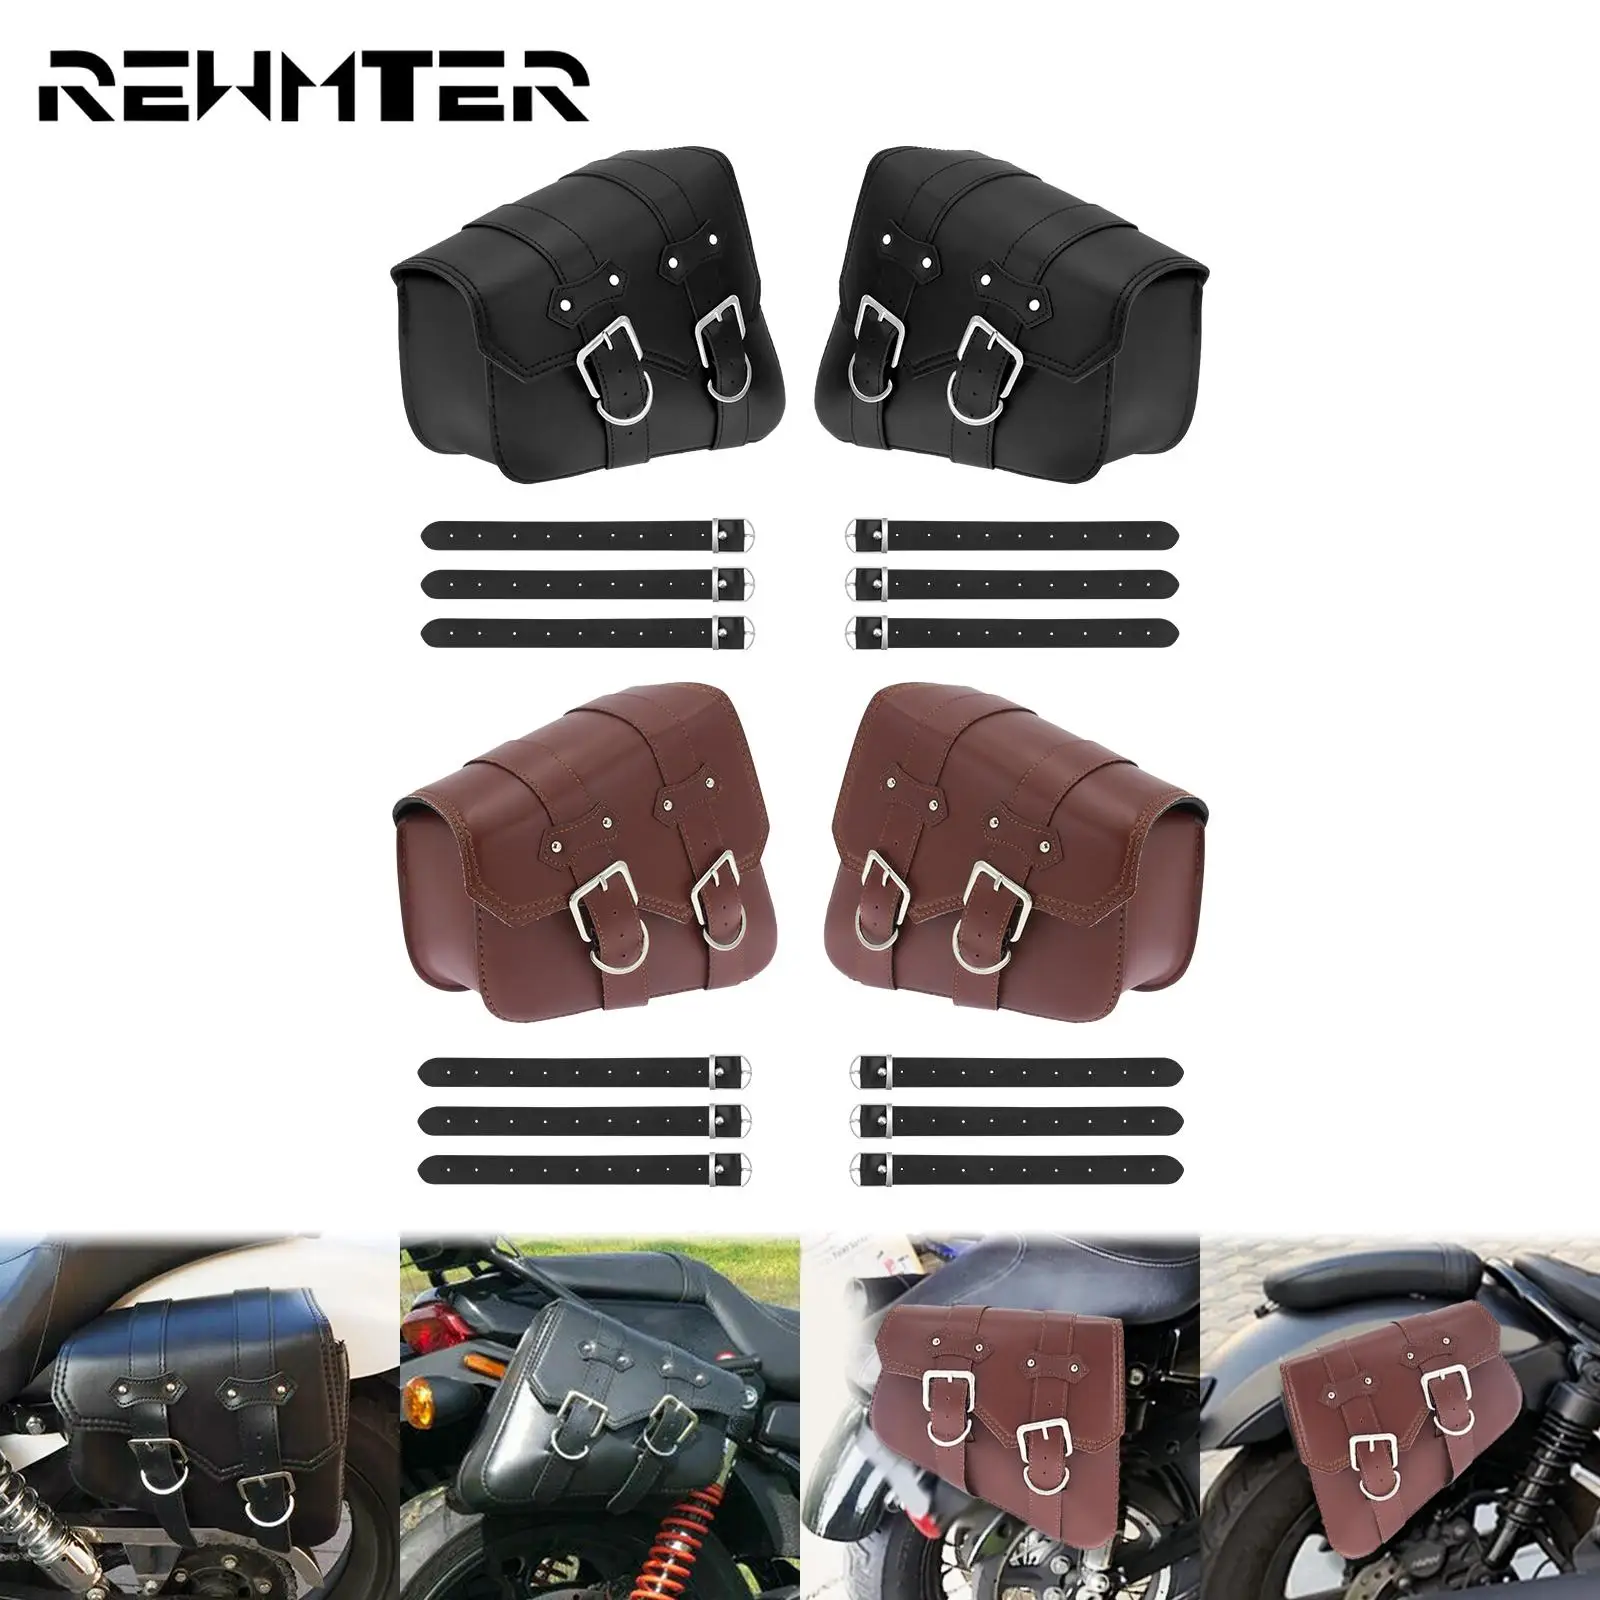 

2xMotorcycle Saddle Bags Side Storage Luggage Side Tool Bag Pouches PU Leather For Harley Sportster XL 1200 883 Touring For BMW